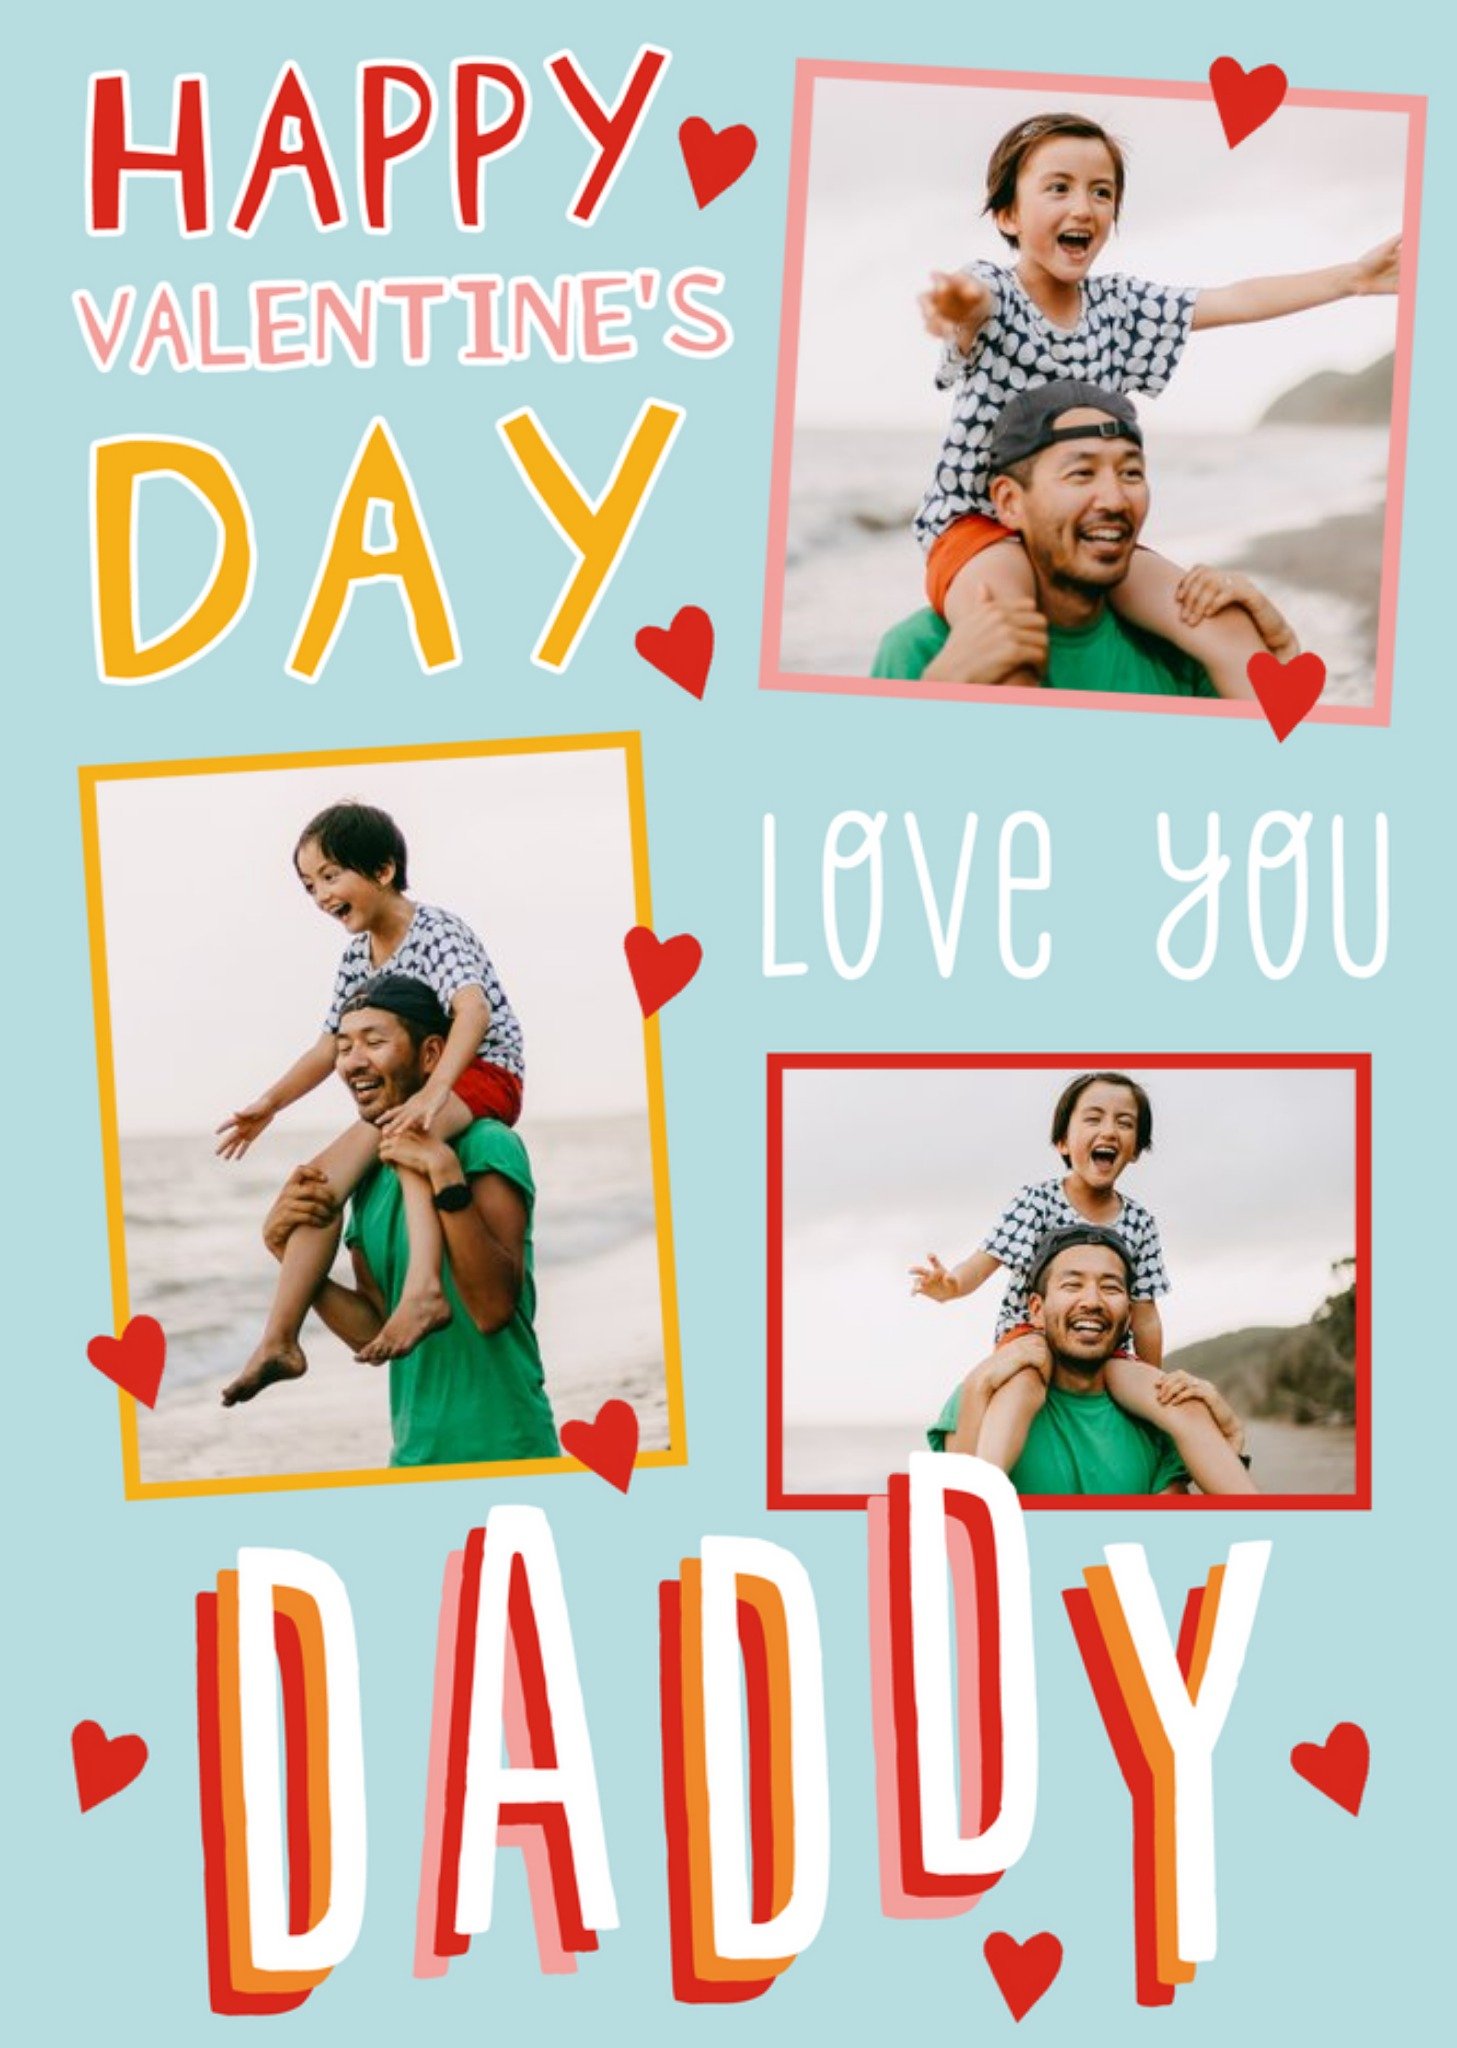 Moonpig Big Bold Type Love You Daddy Photo Upload Valentine's Day Card, Large